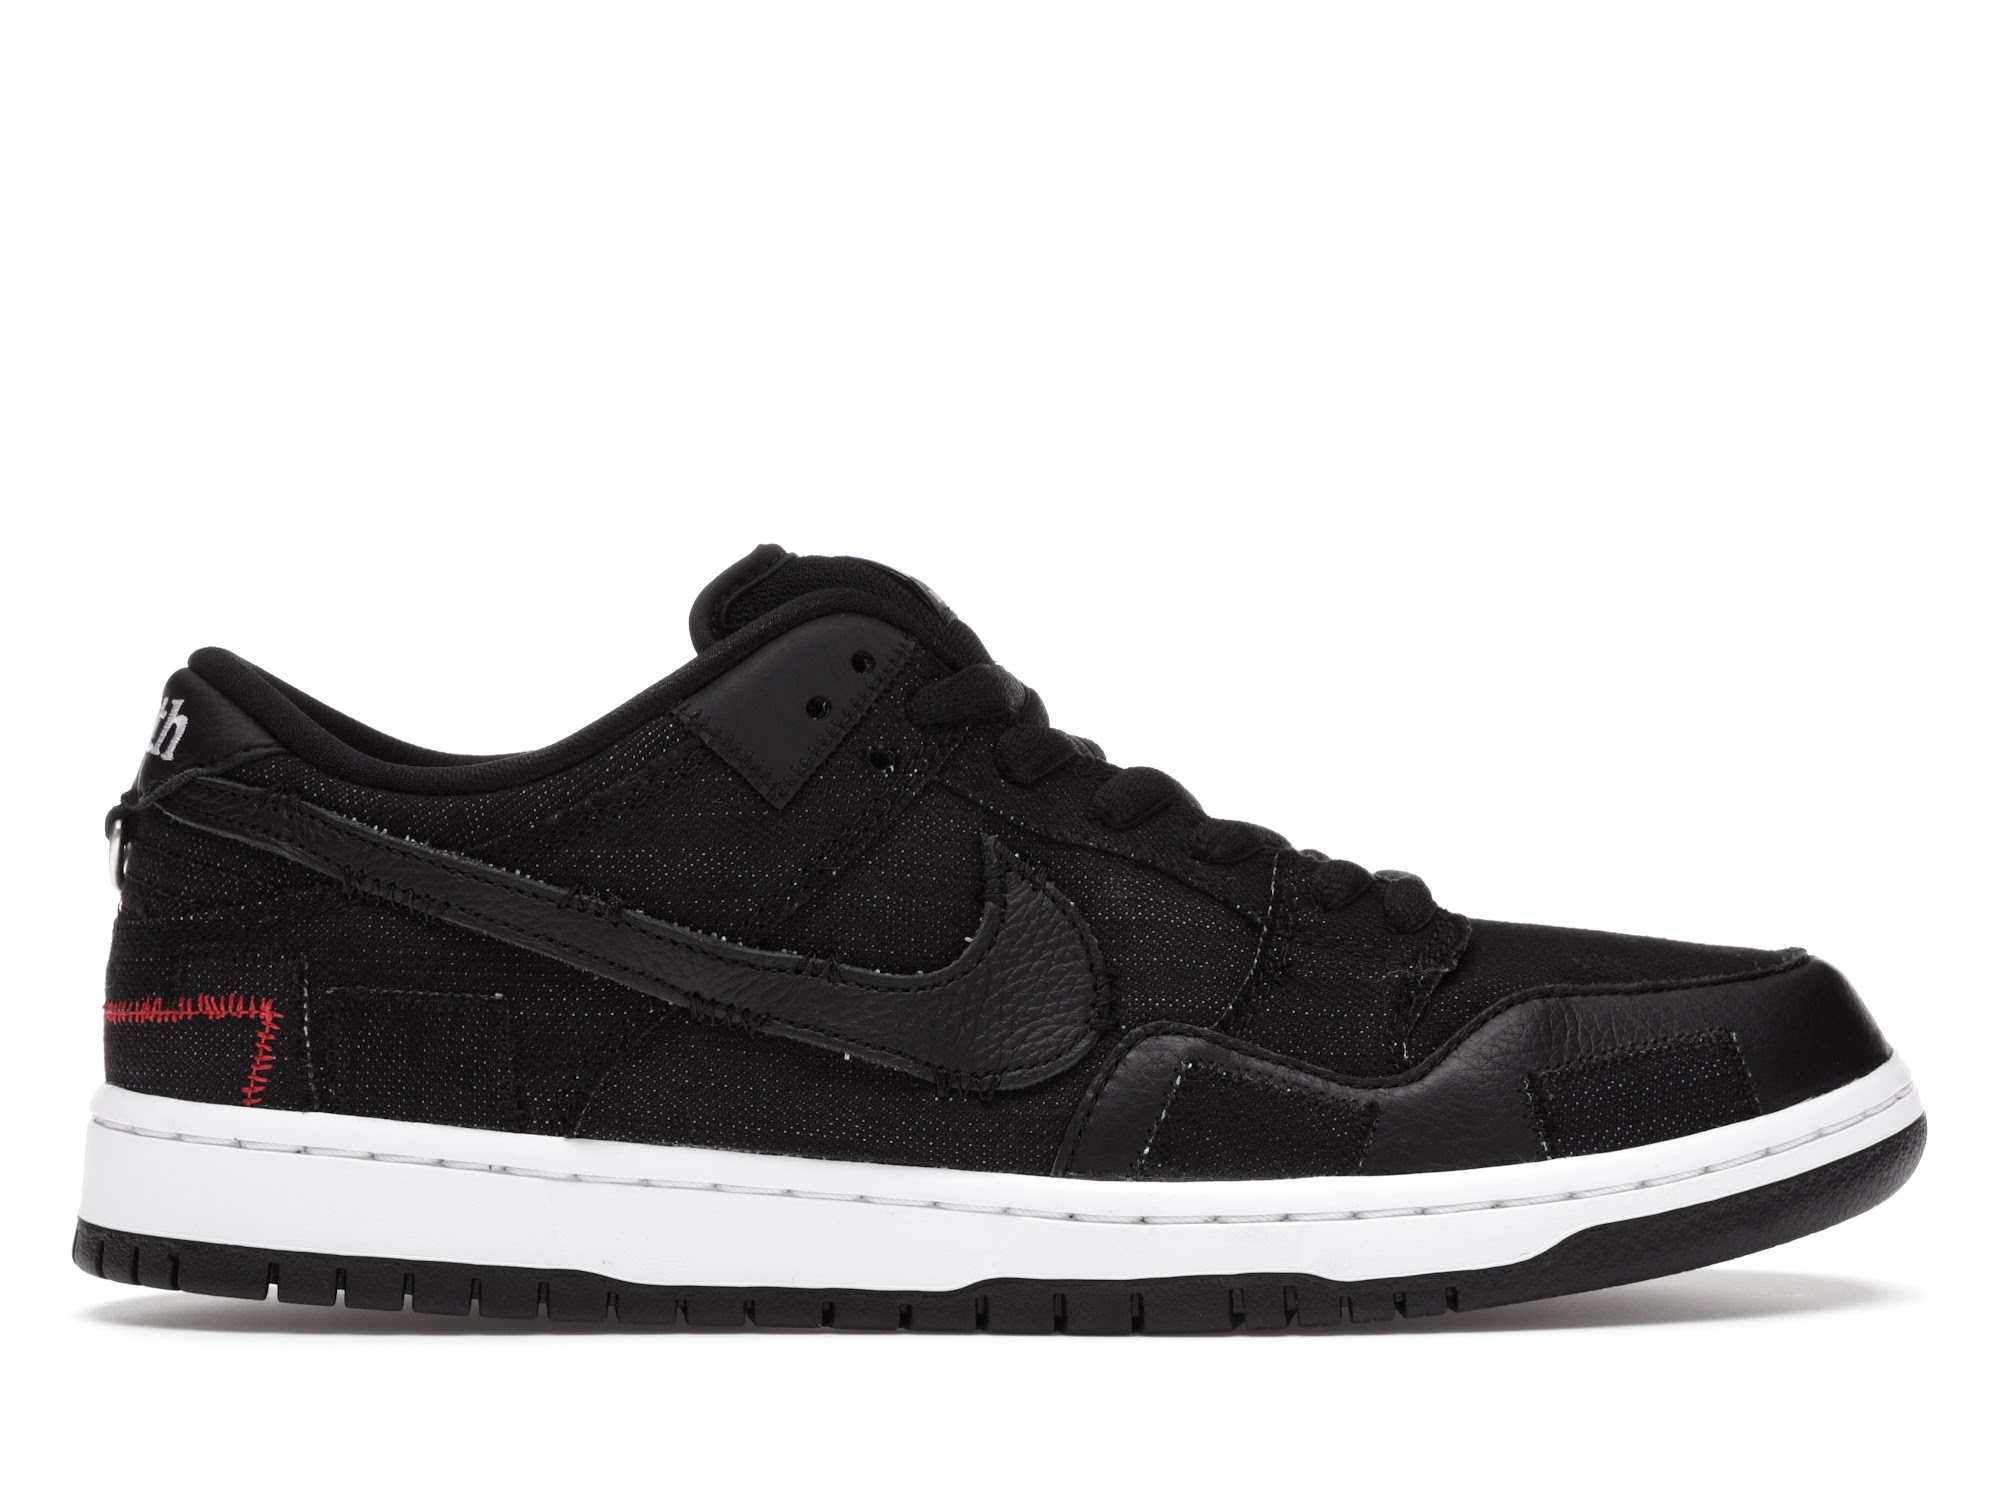 Nike SB Dunk Low Wasted Youth (Special Box)